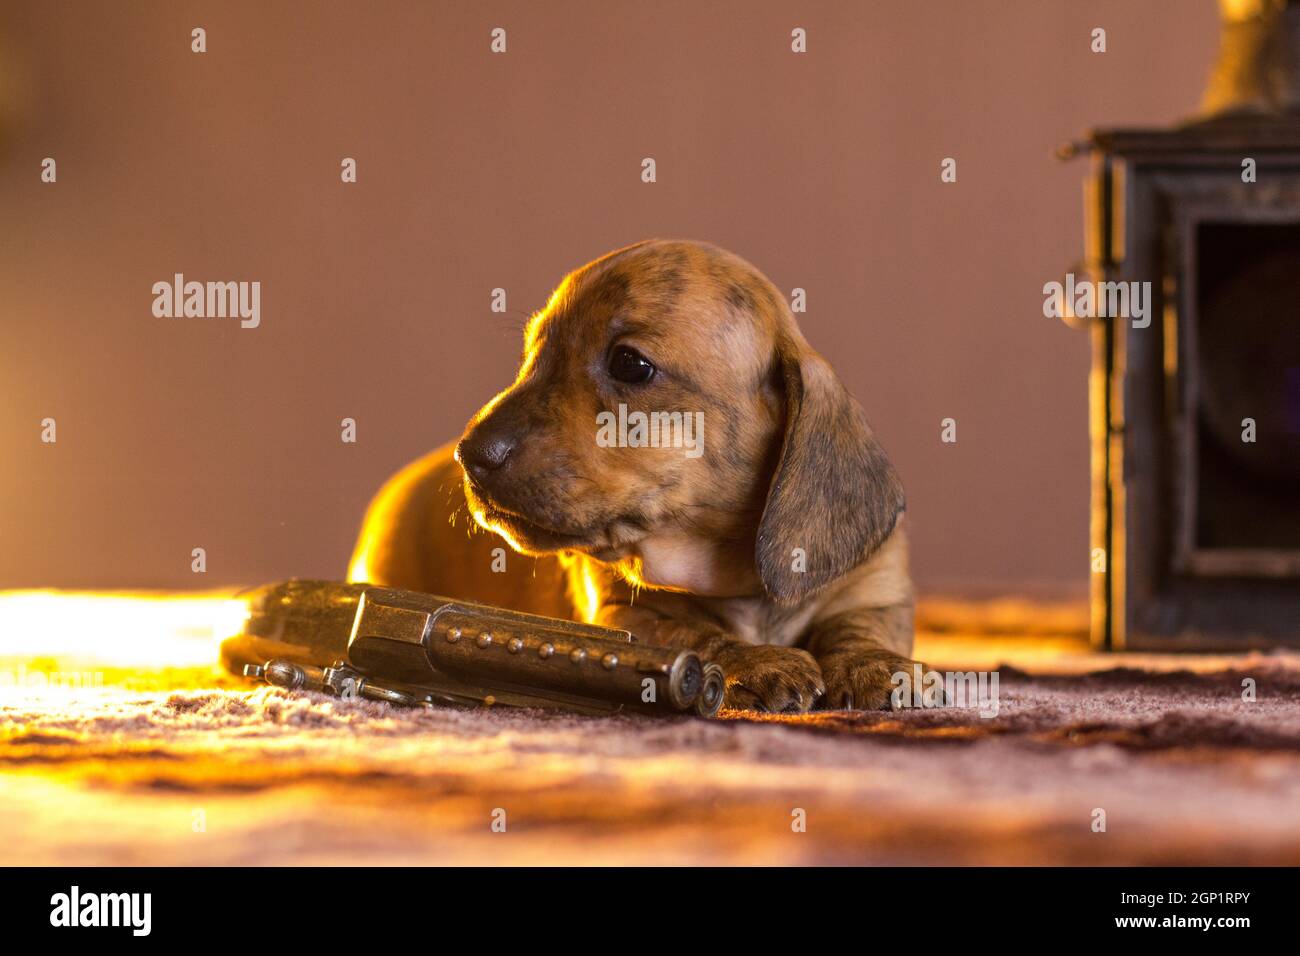 Gangster tan brown brindle dachshund puppy laying near toy gun on table near lantern in contoured yellow lighting indoors Stock Photo